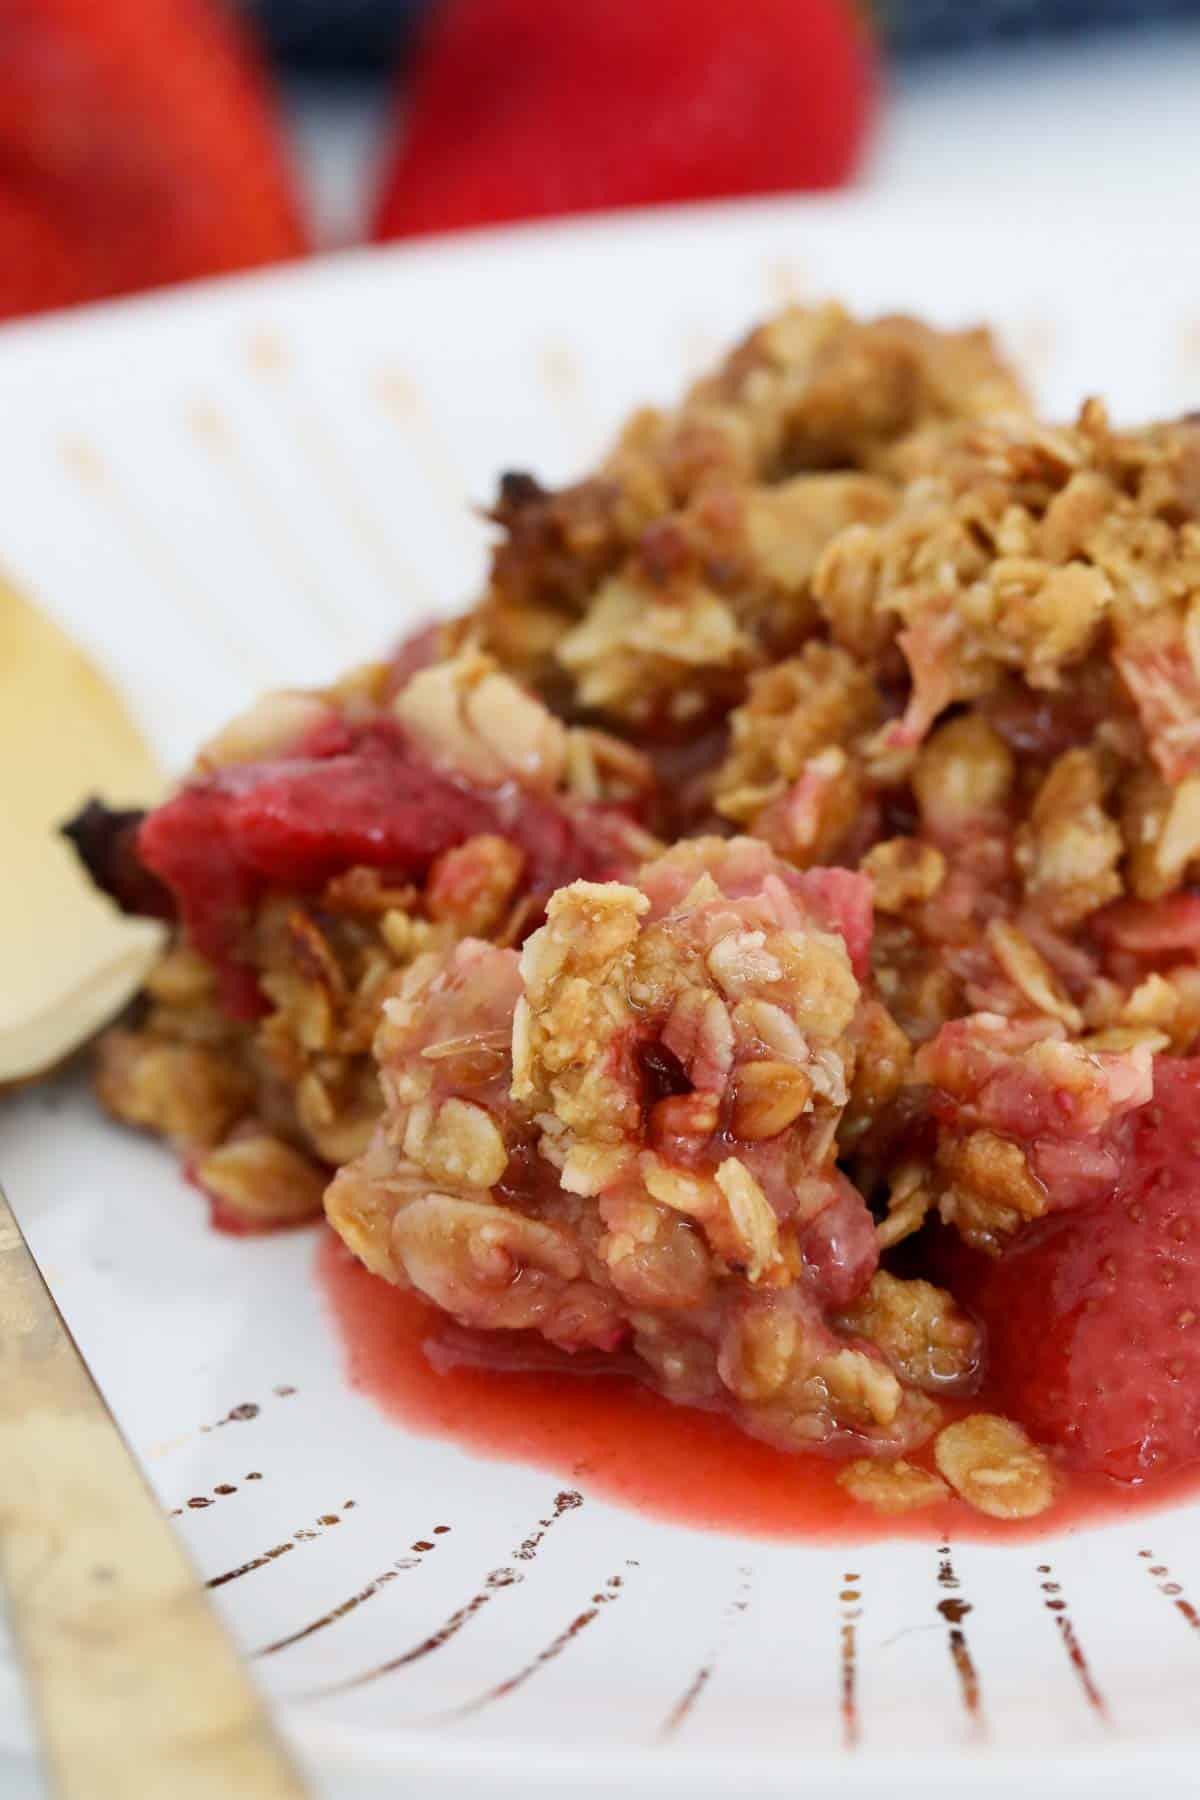 A serve of juicy strawberry dessert with crunchy crumble on top.